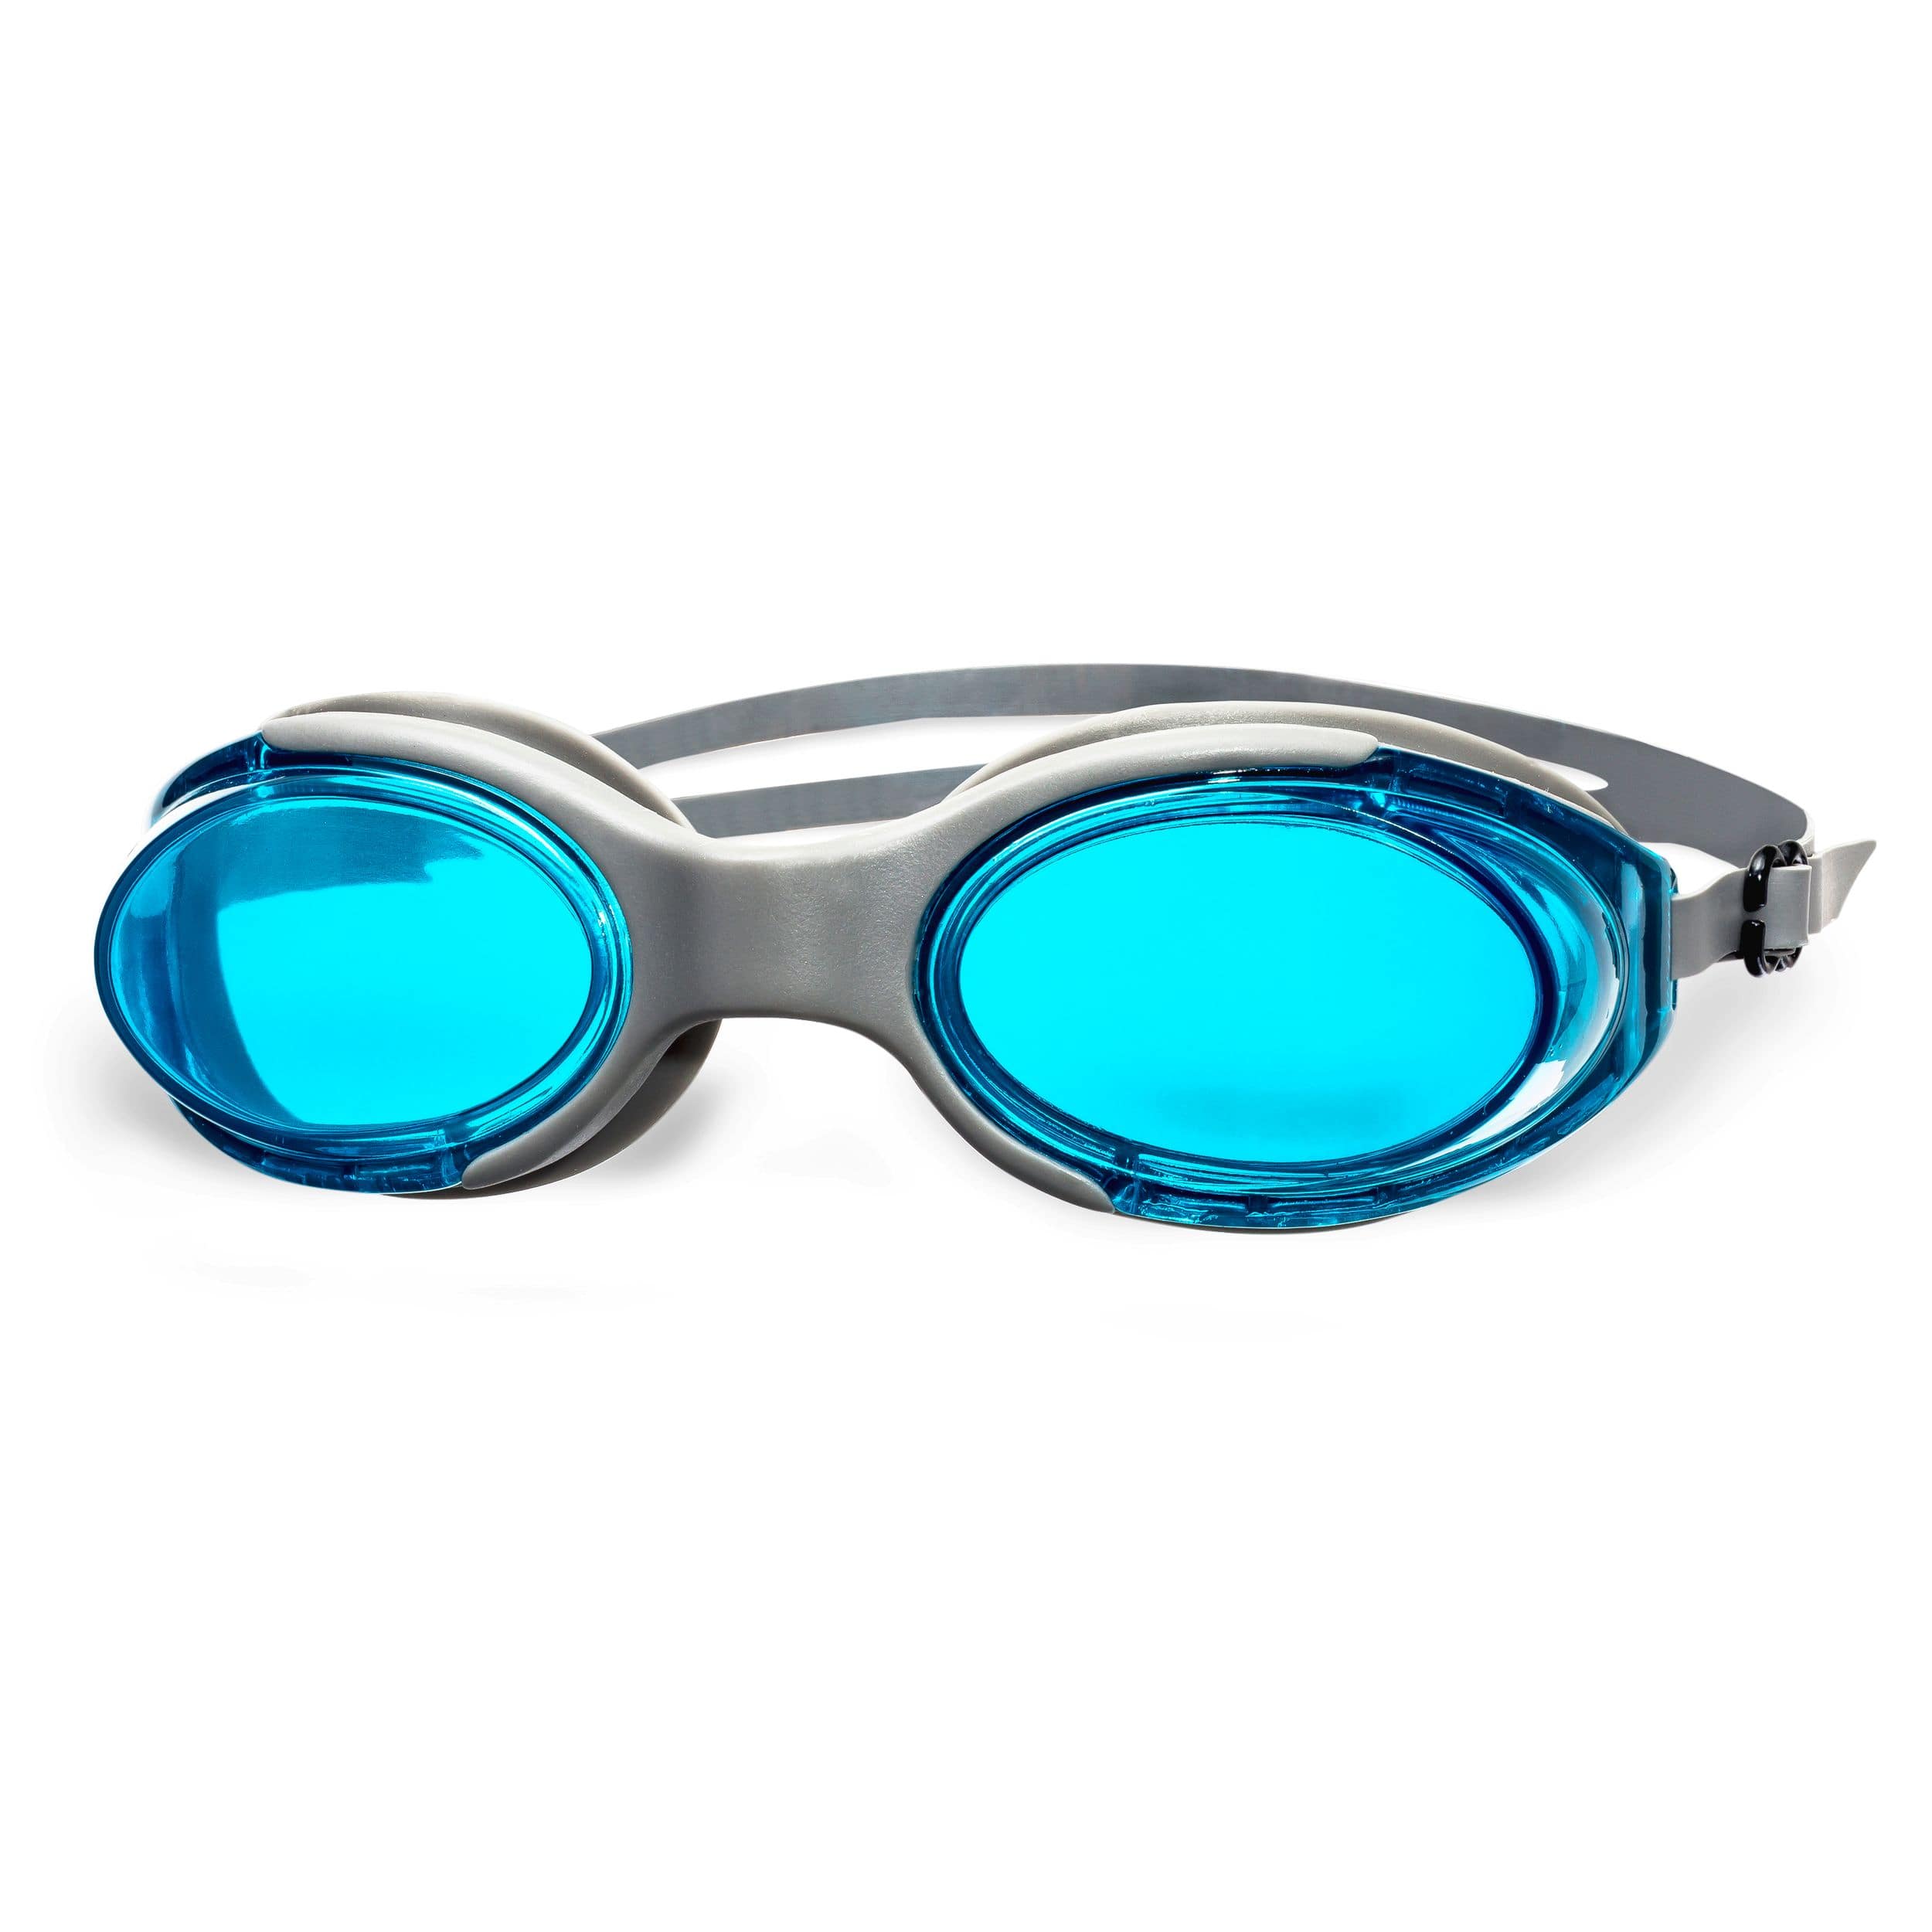 FORM Swim Goggles Review - The World's First Smart Swim Goggle